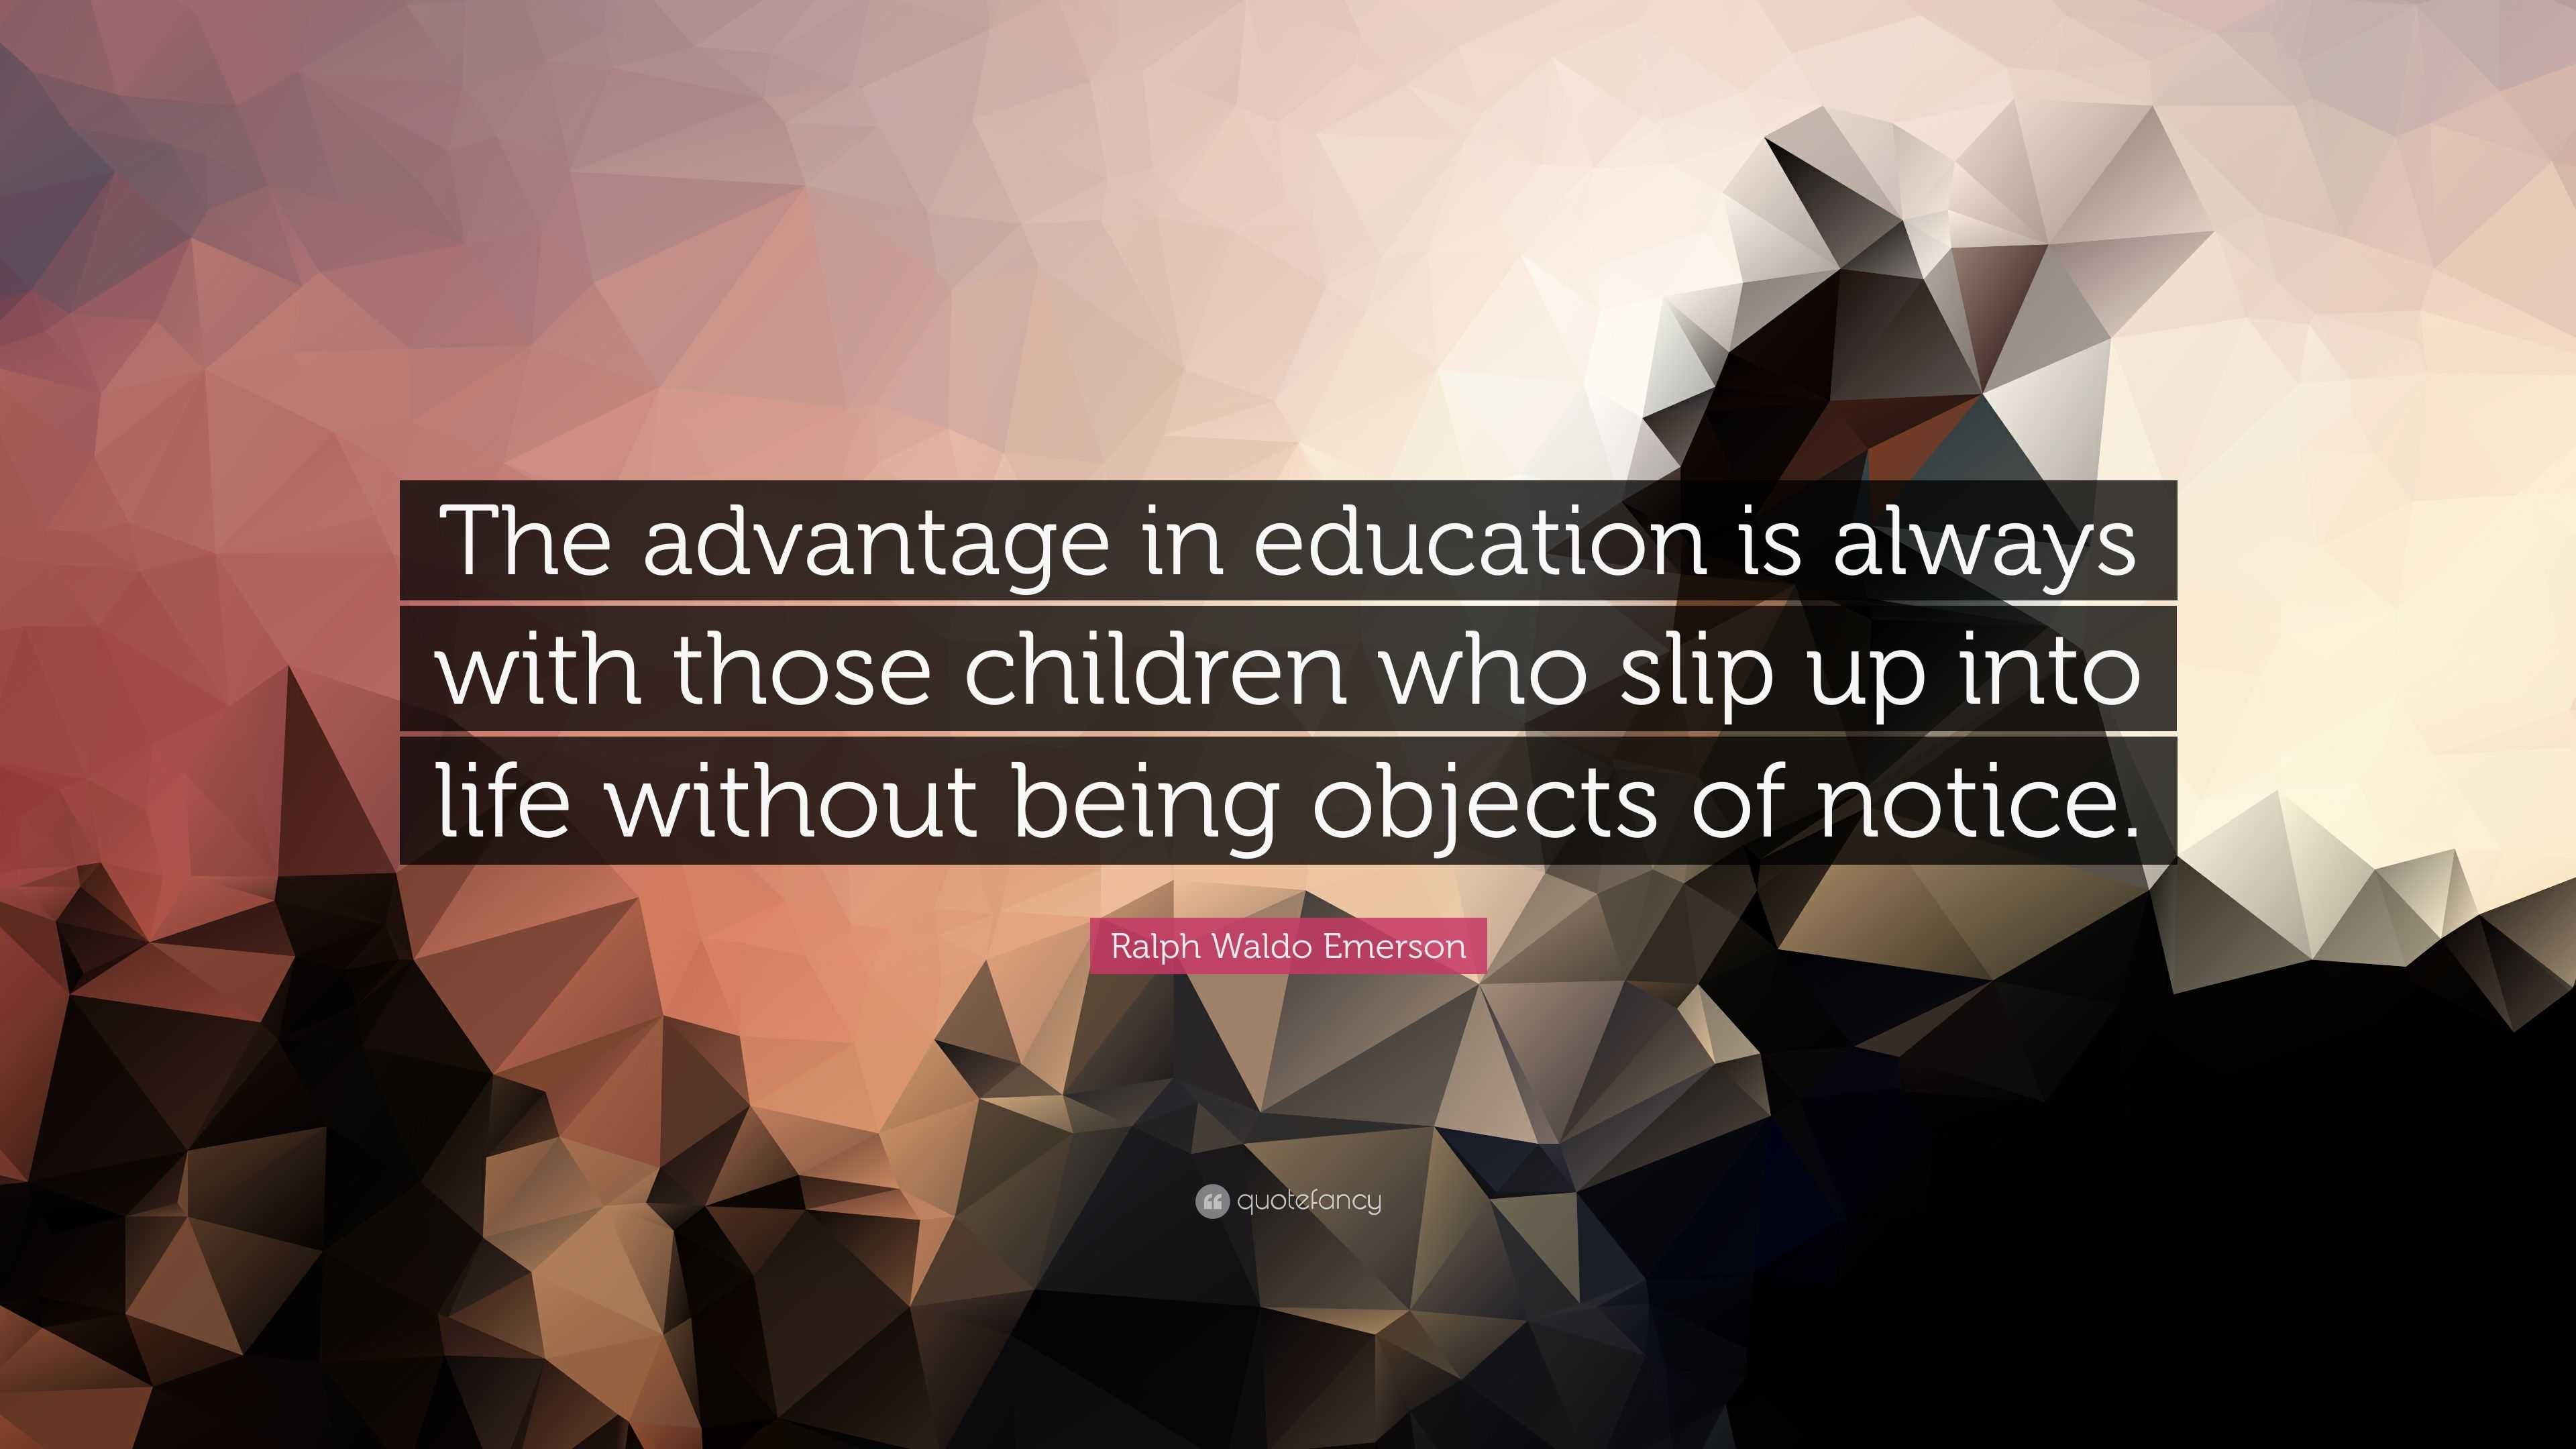 Ralph Waldo Emerson Quote: “The Advantage In Education Is Always With Those Children Who Slip Up